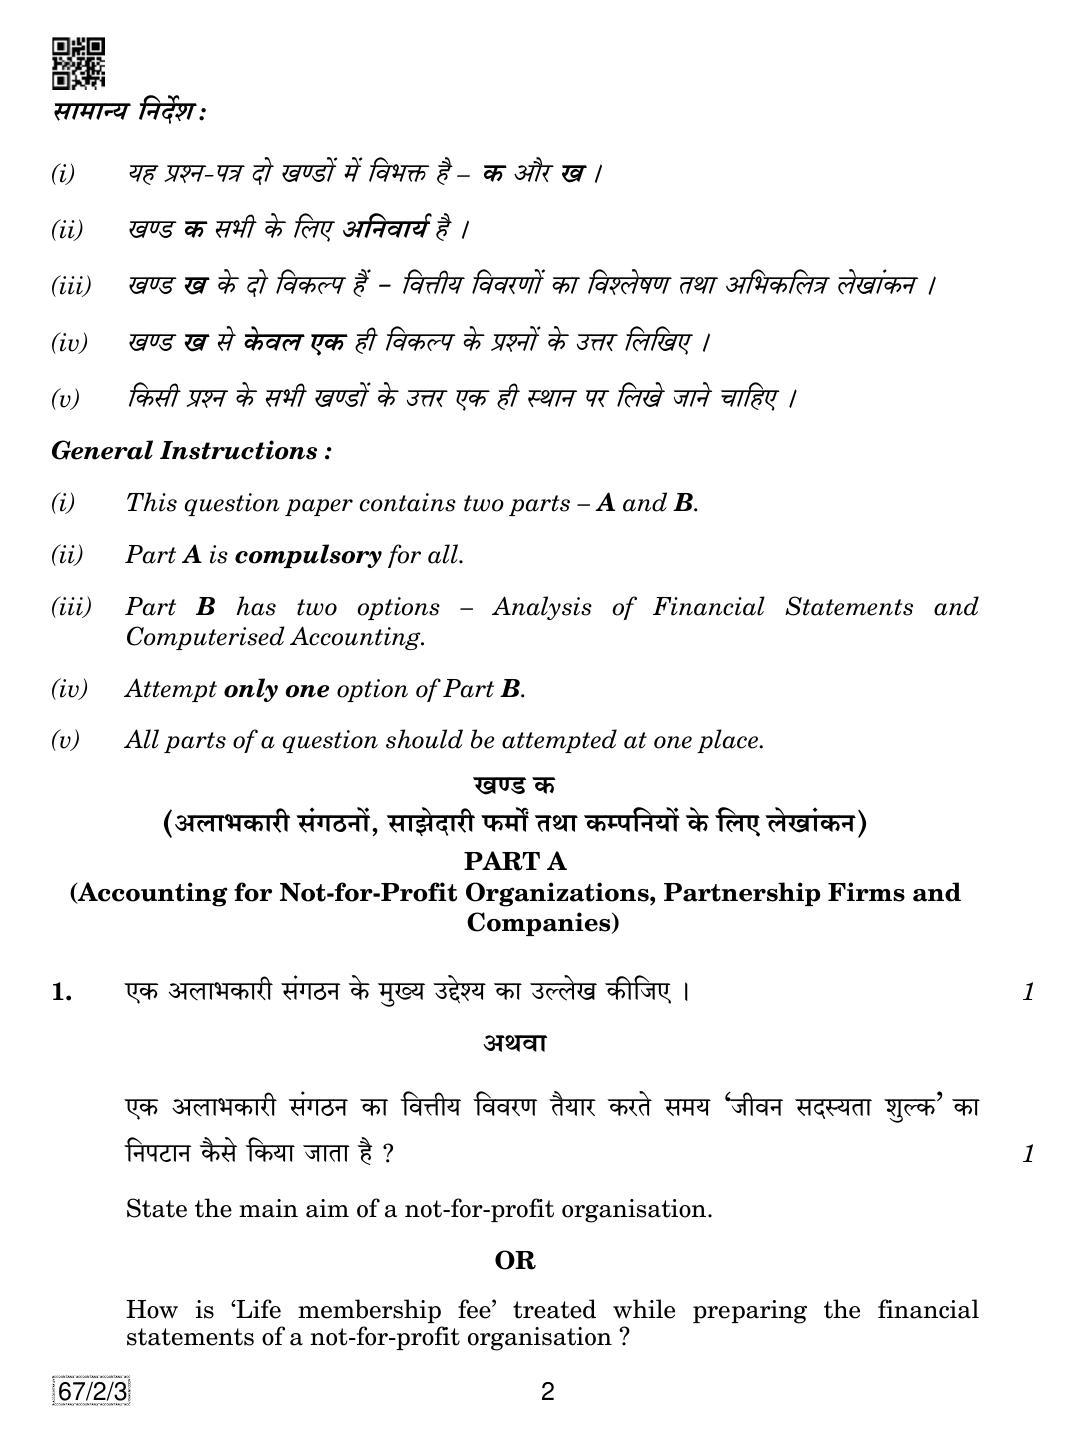 CBSE Class 12 67-2-3 Accountancy 2019 Question Paper - Page 2